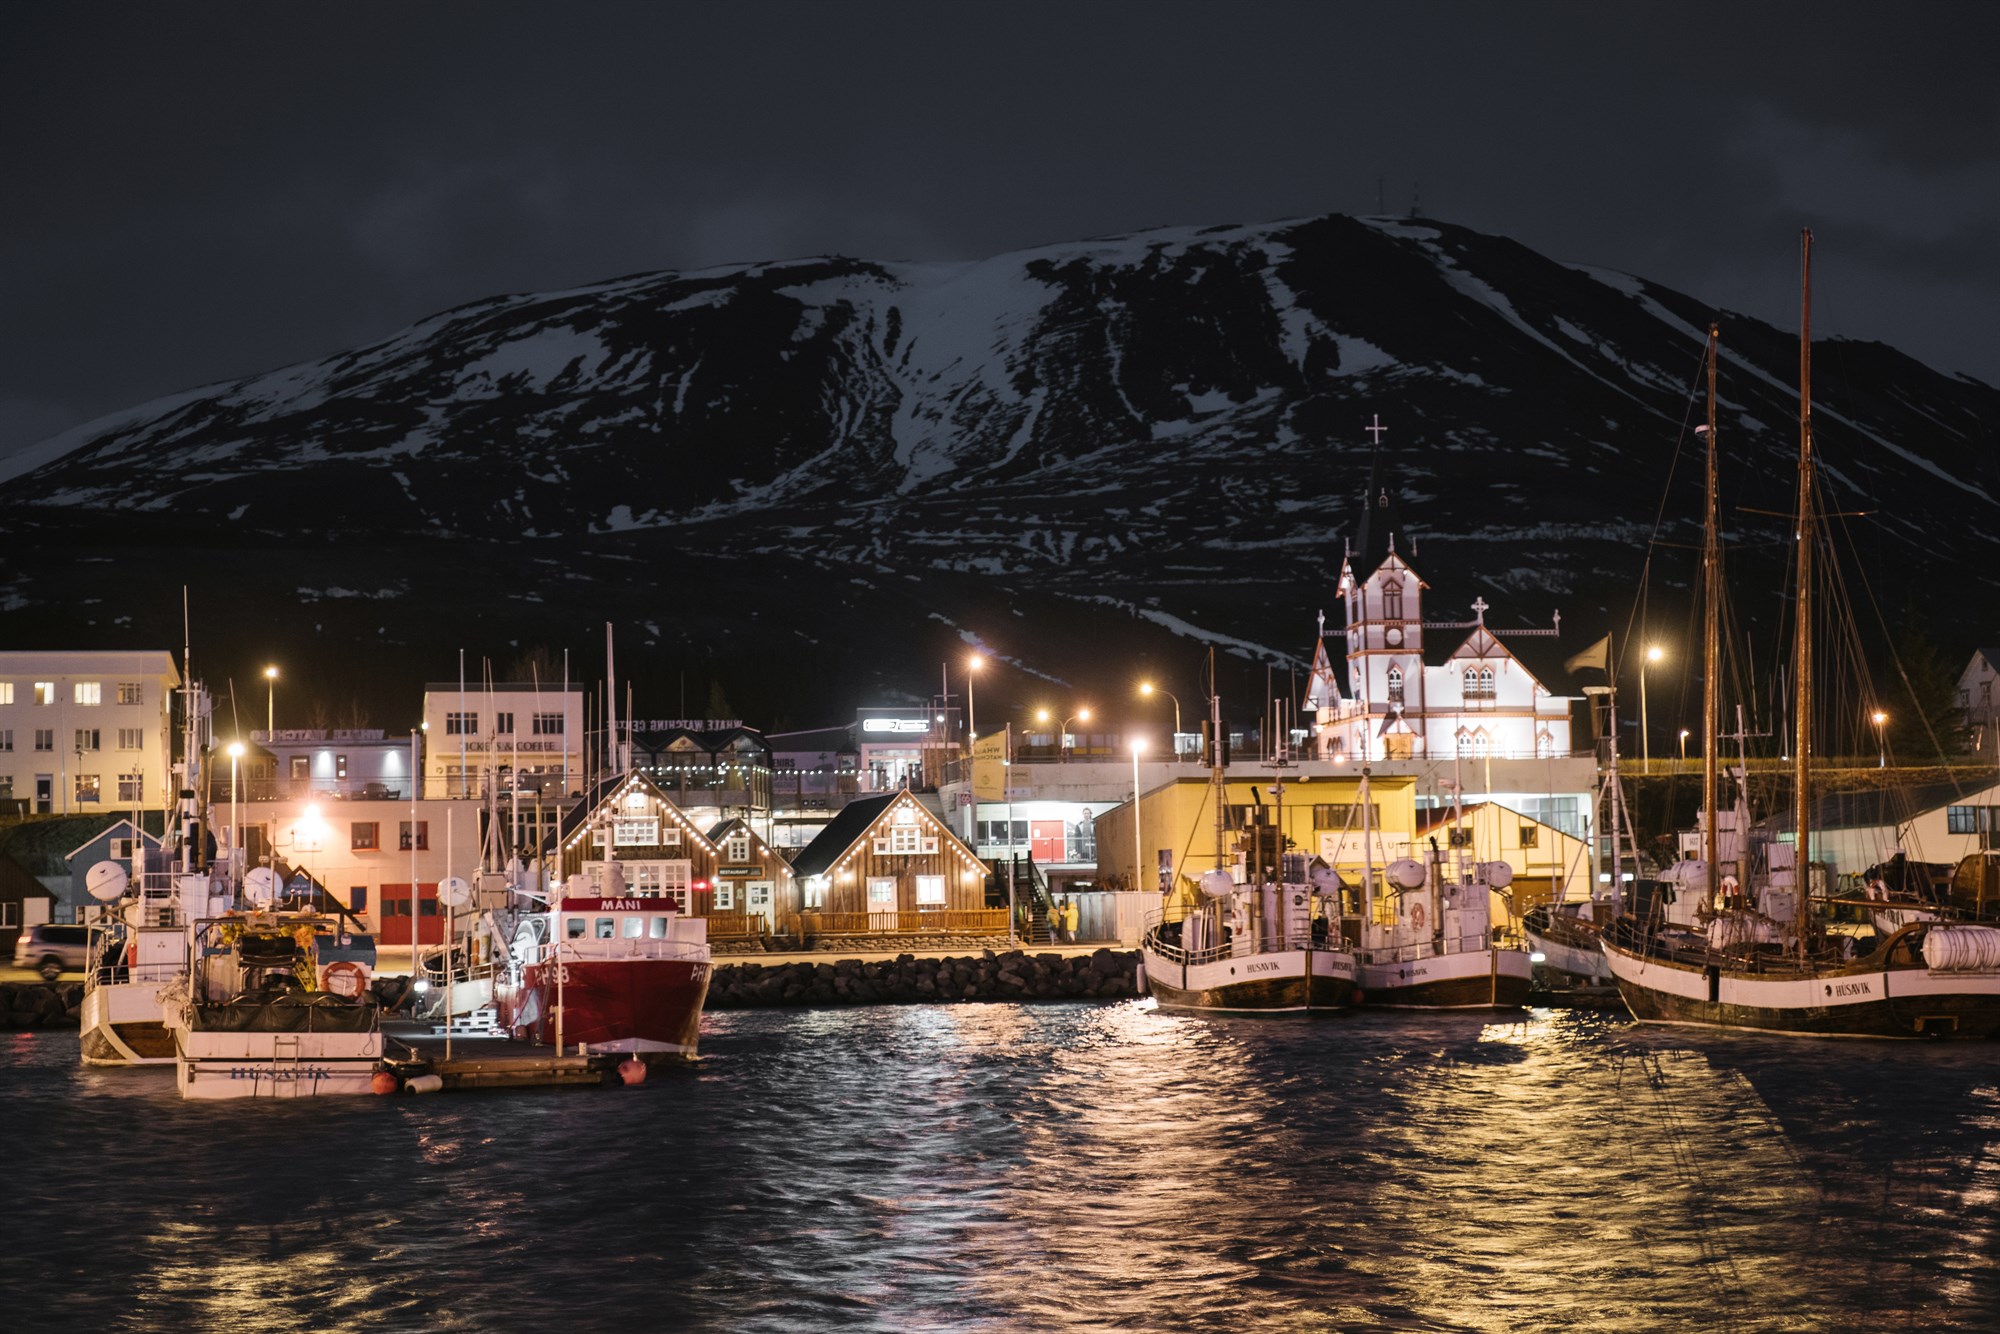 Husavik is renowned for having some of best the whale watching spots in Europe 